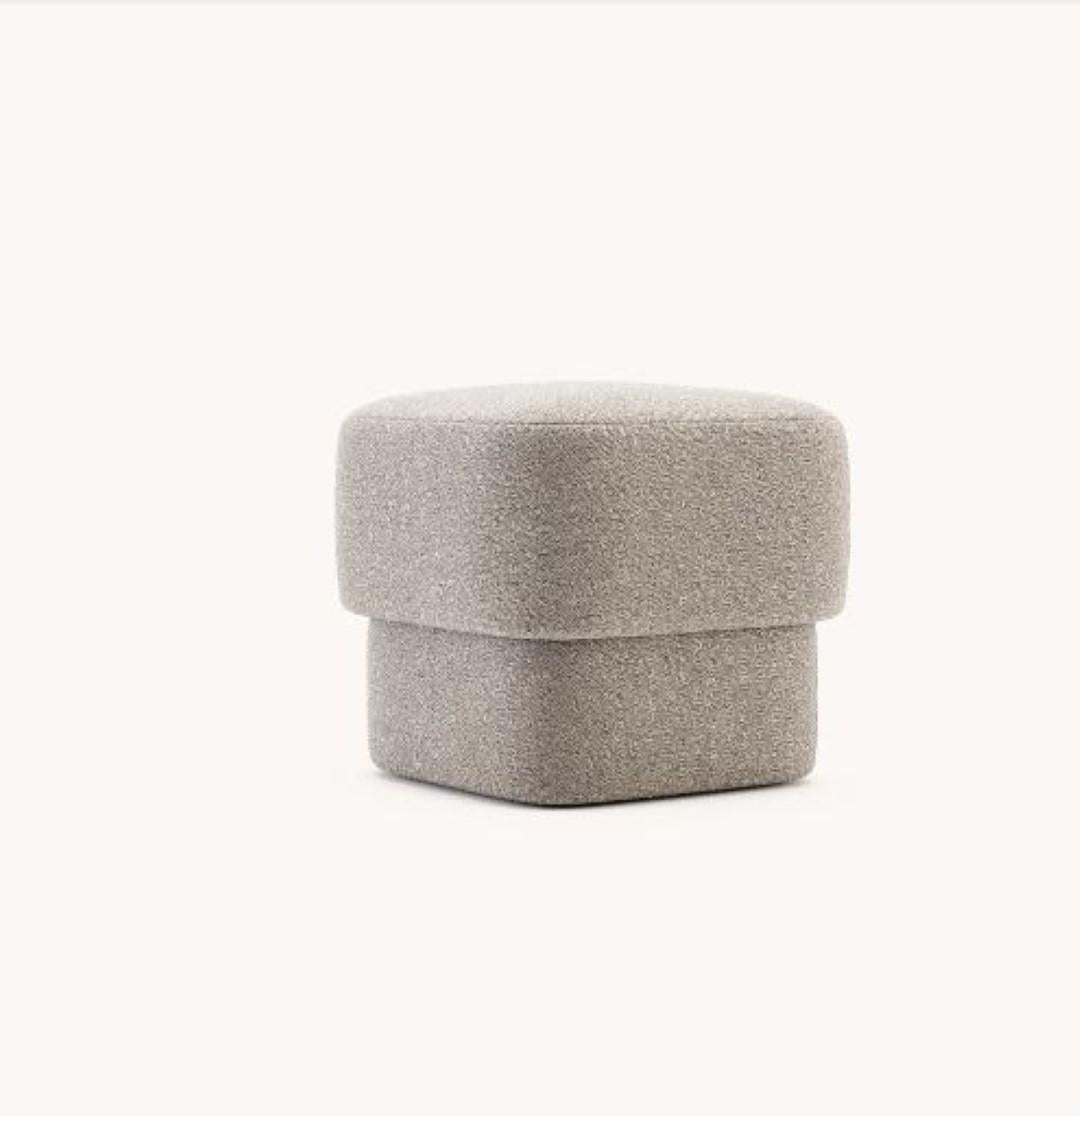 Kate S Pouf by Domkapa
Materials: Velvet, Upholstery.
Dimensions: W 48 x D 48 x H 45 cm. 
Also available in different materials. Please contact us.

Fully upholstered, Kate pouf is the ultimate comfortable experience to be added to any project.